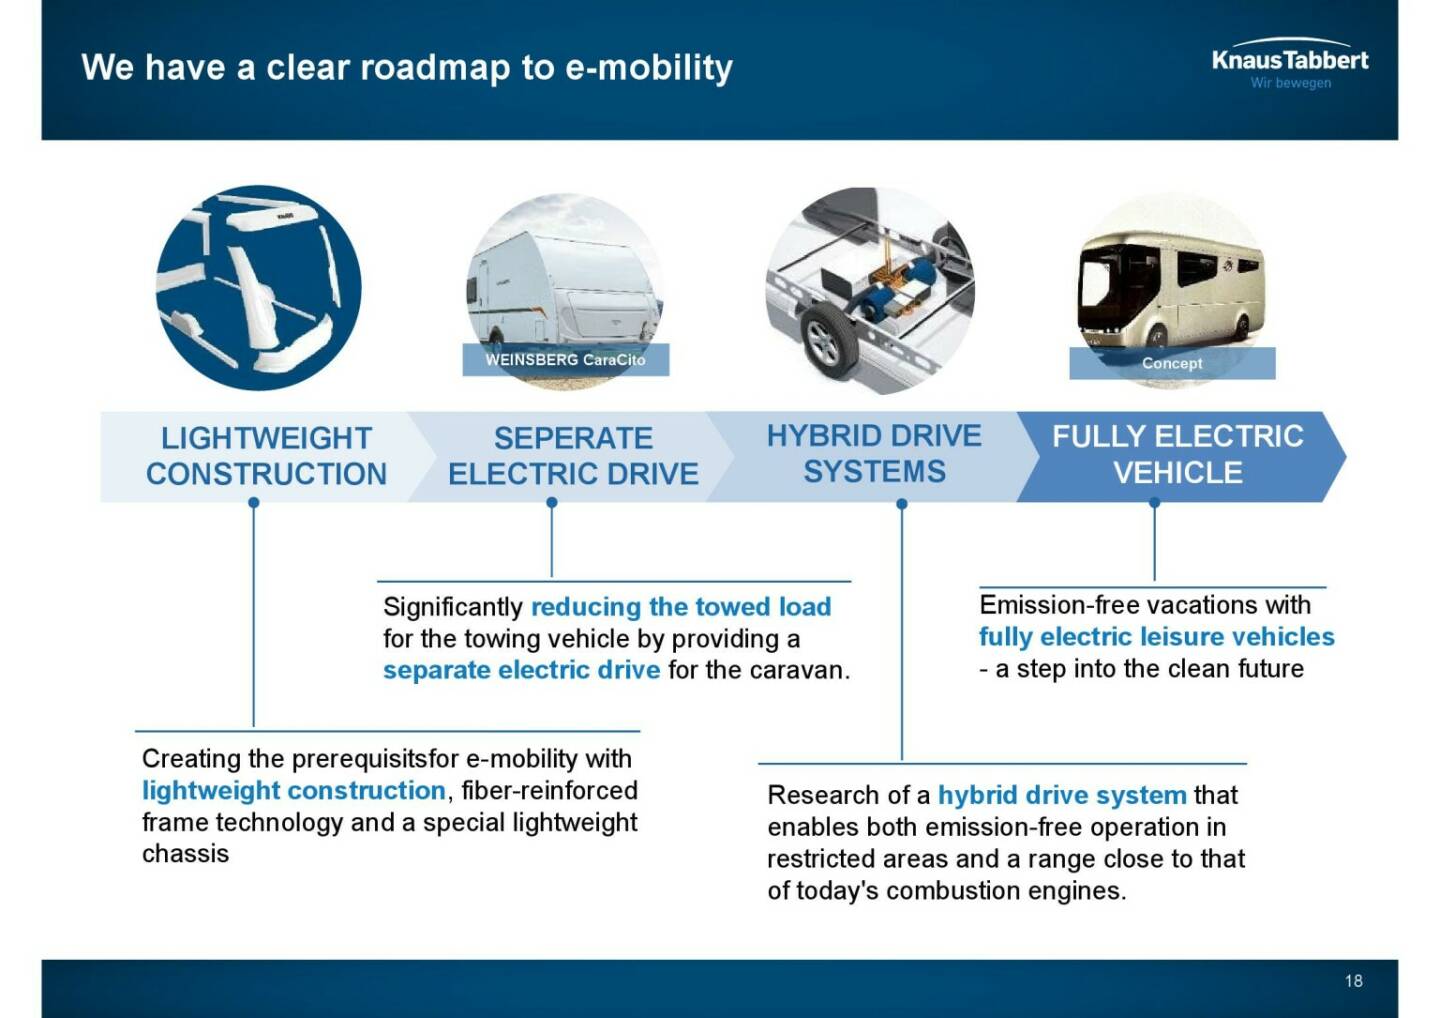 Knaus Tabbert - We have a clear roadmap to e-mobility 